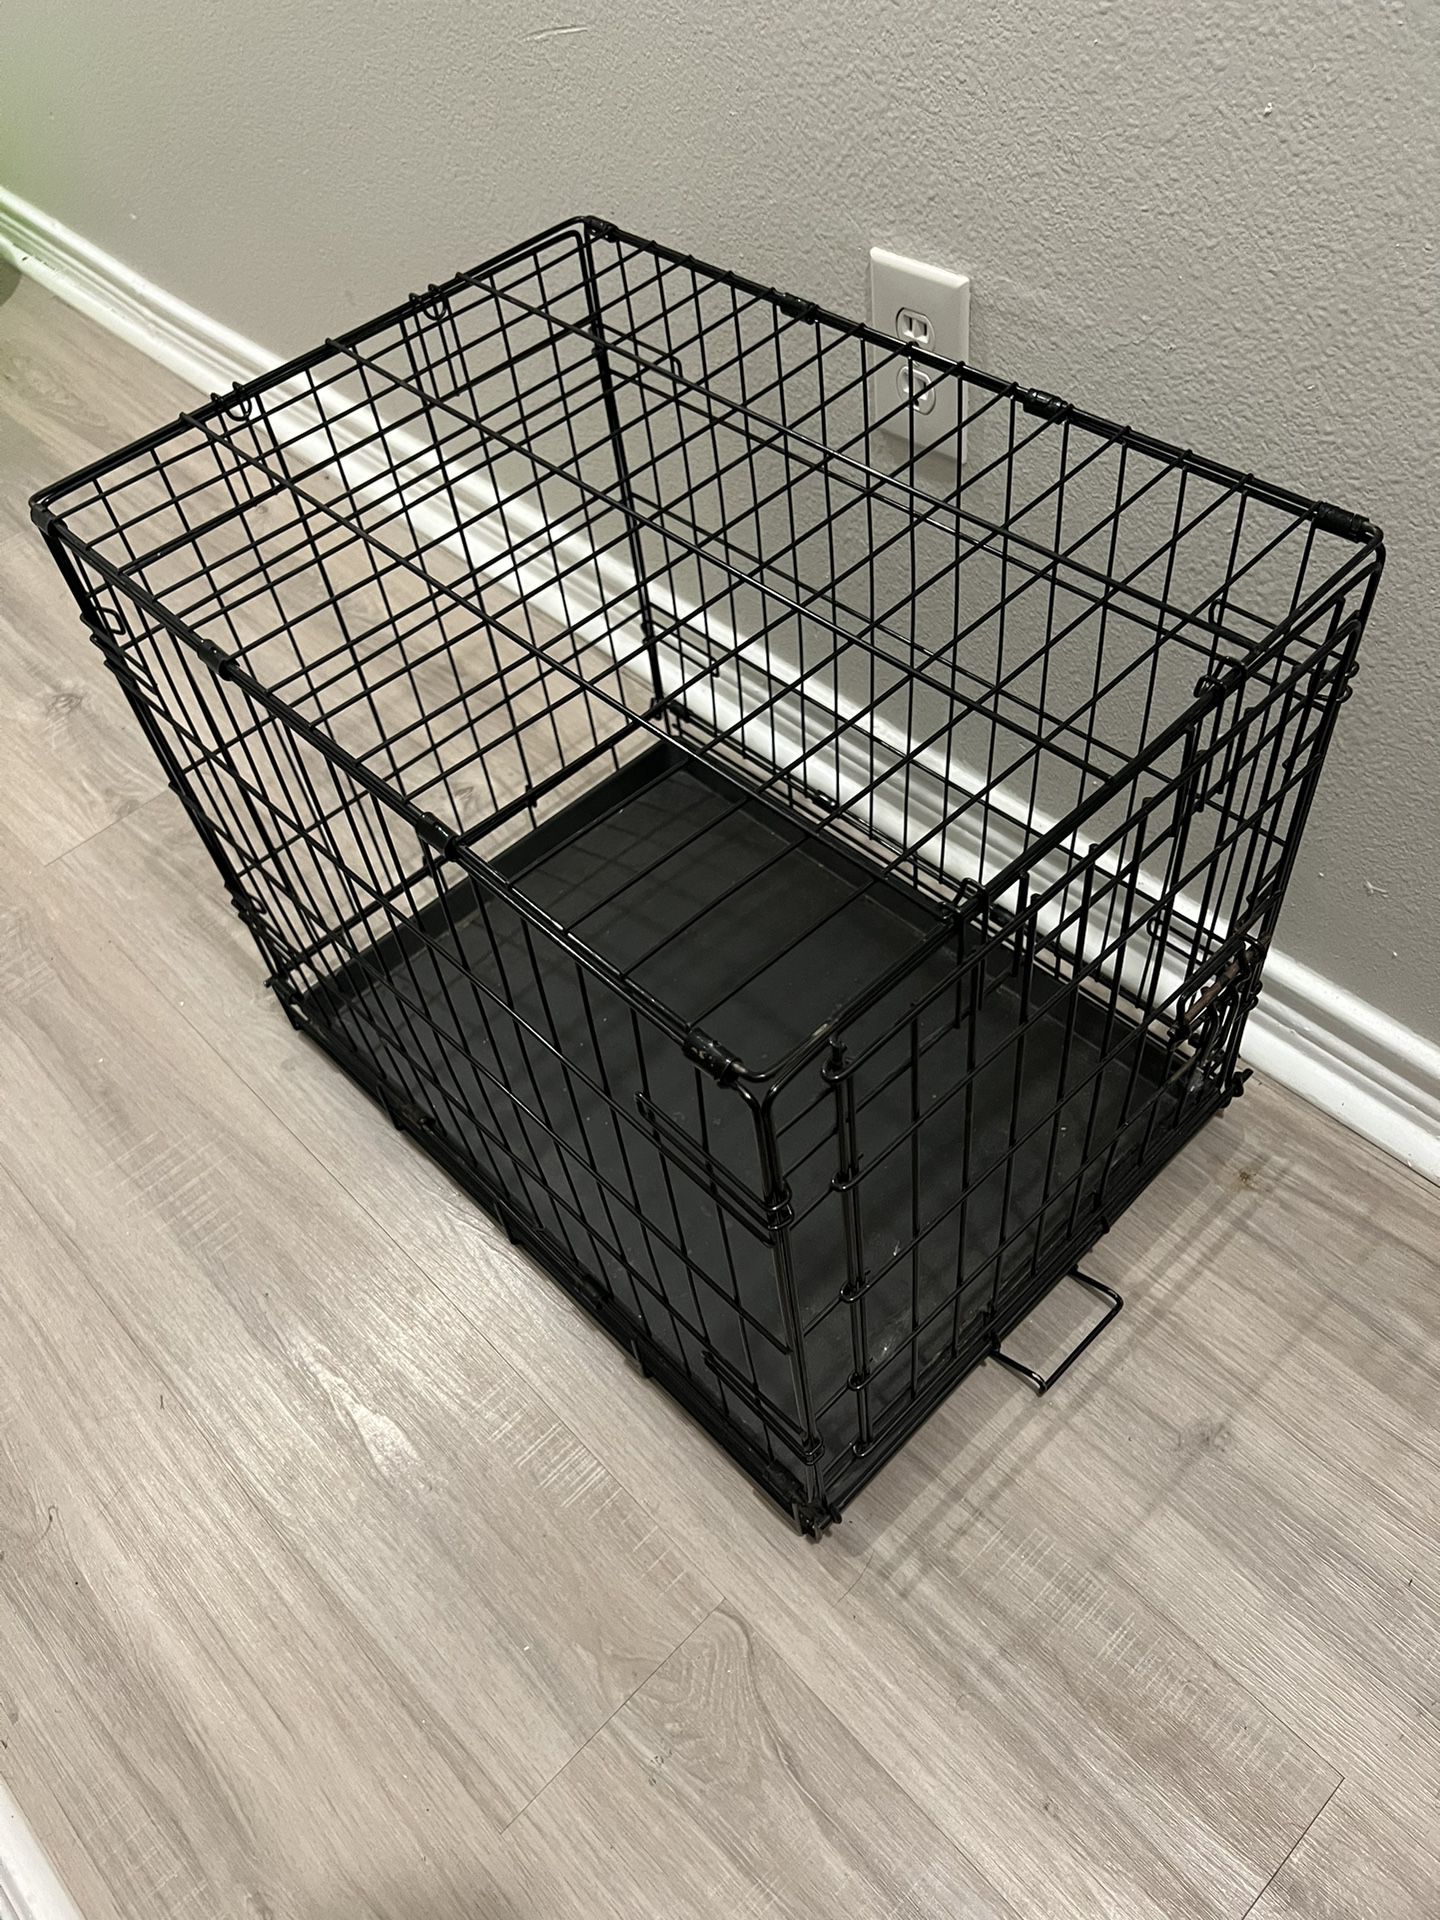 Cage For Birds Or Small Animals